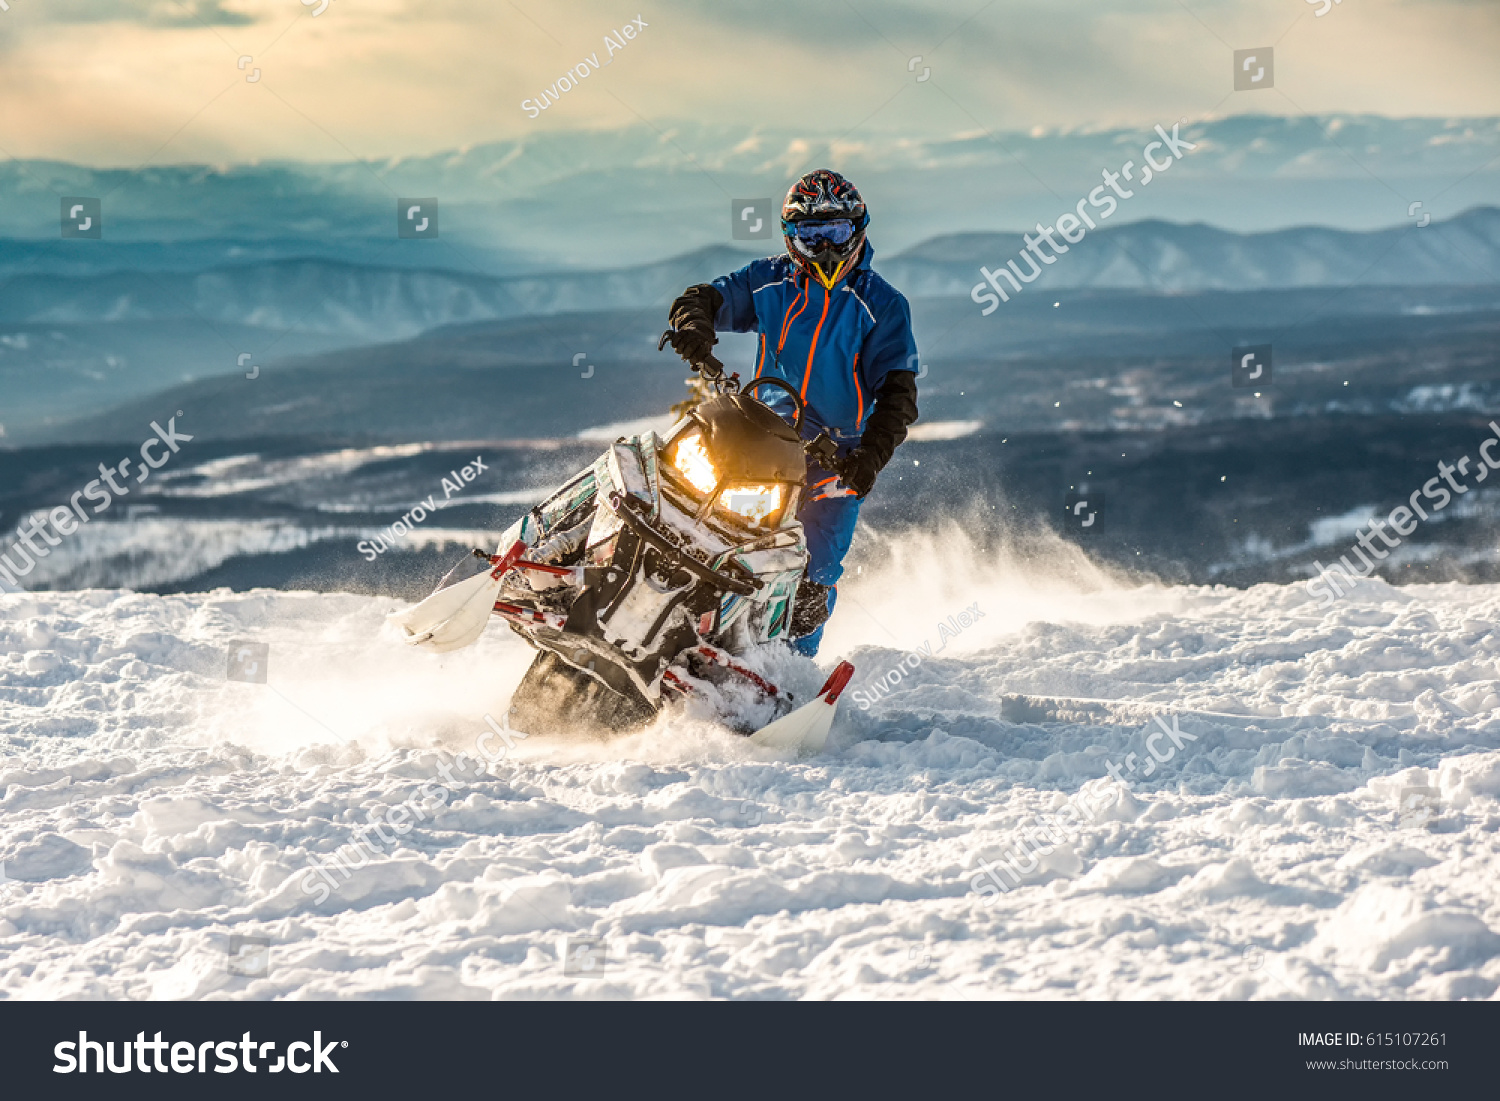 Rider on the snowmobile in the mountains ski resort in Amut Russia. #615107261